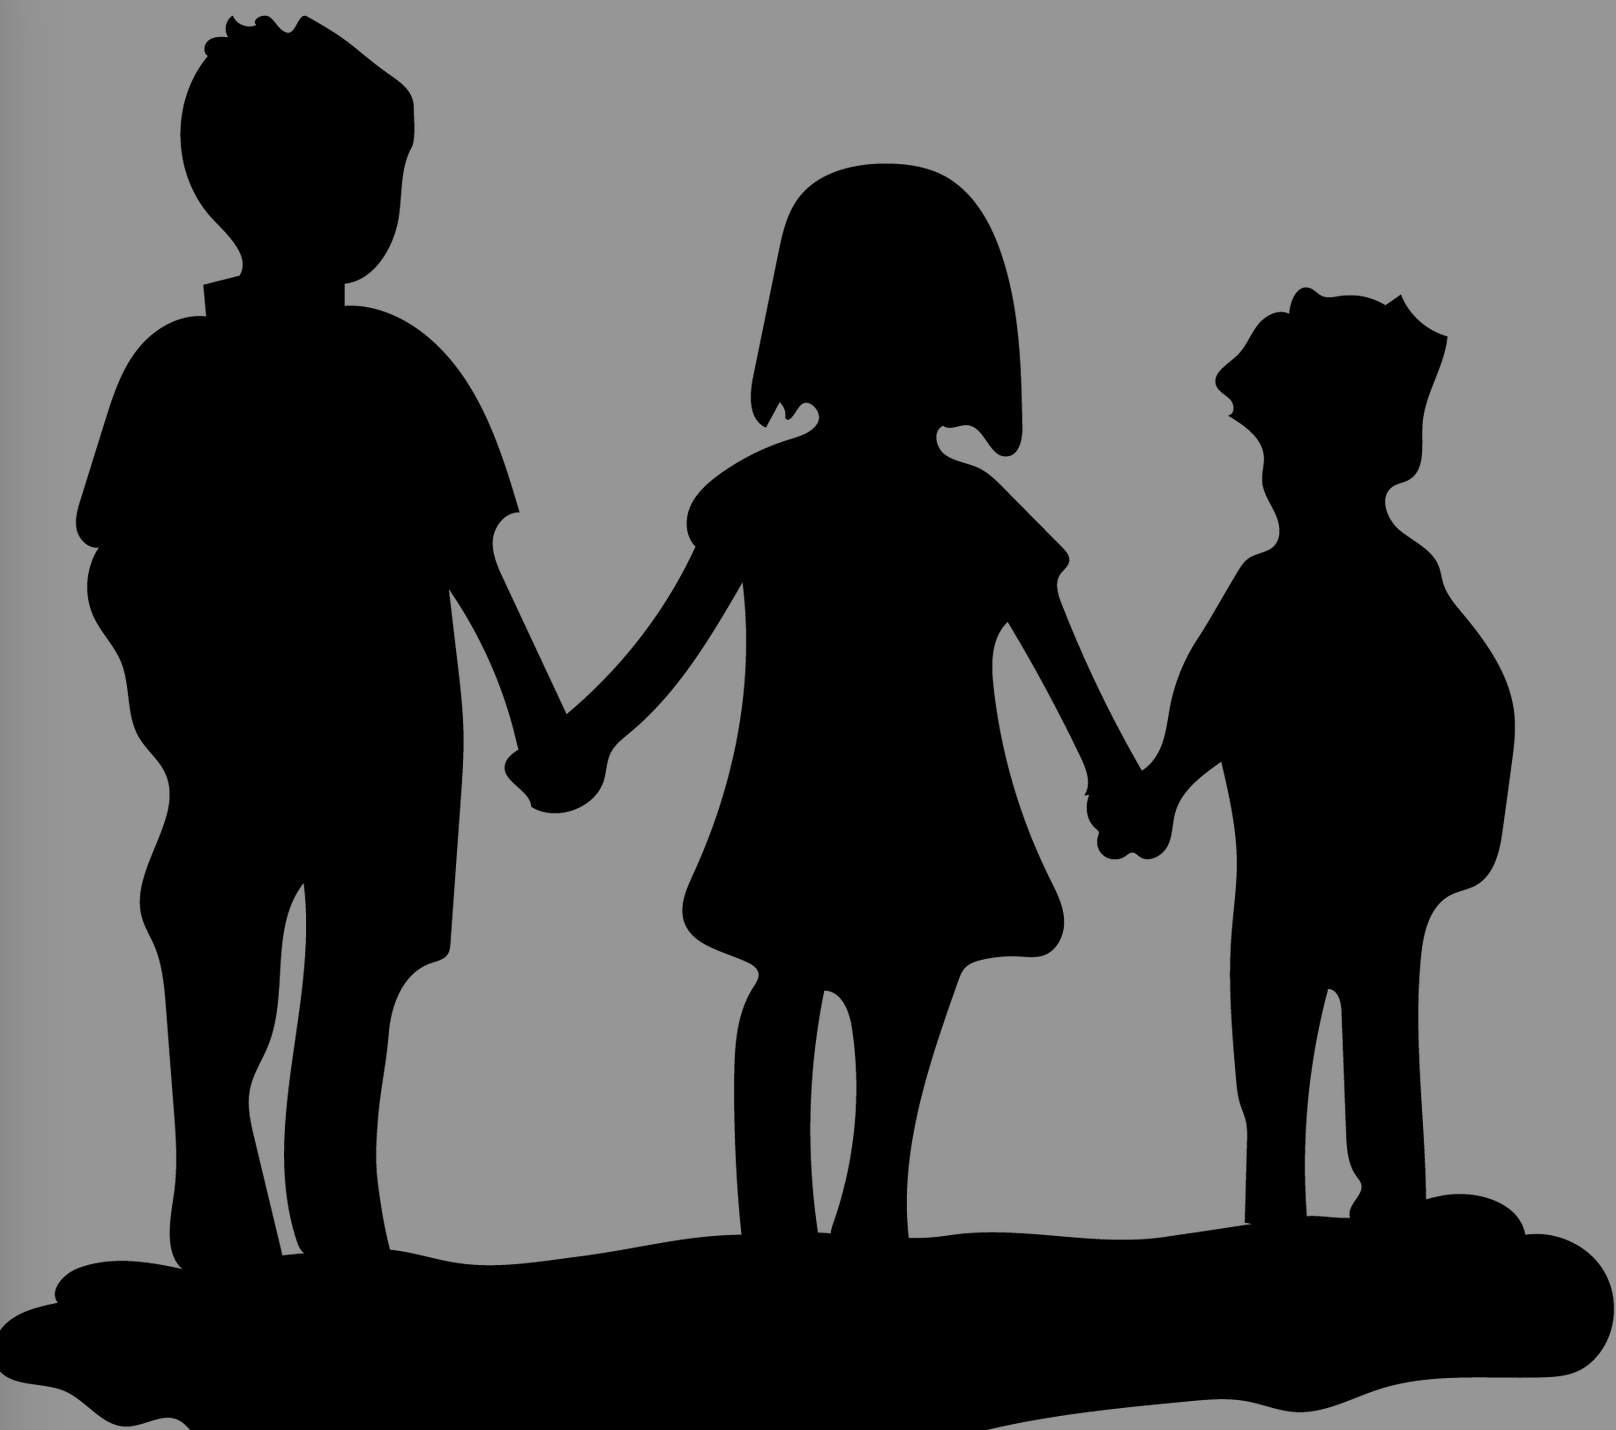 Woodside students, who have siblings, are affected in many ways by this relationship.